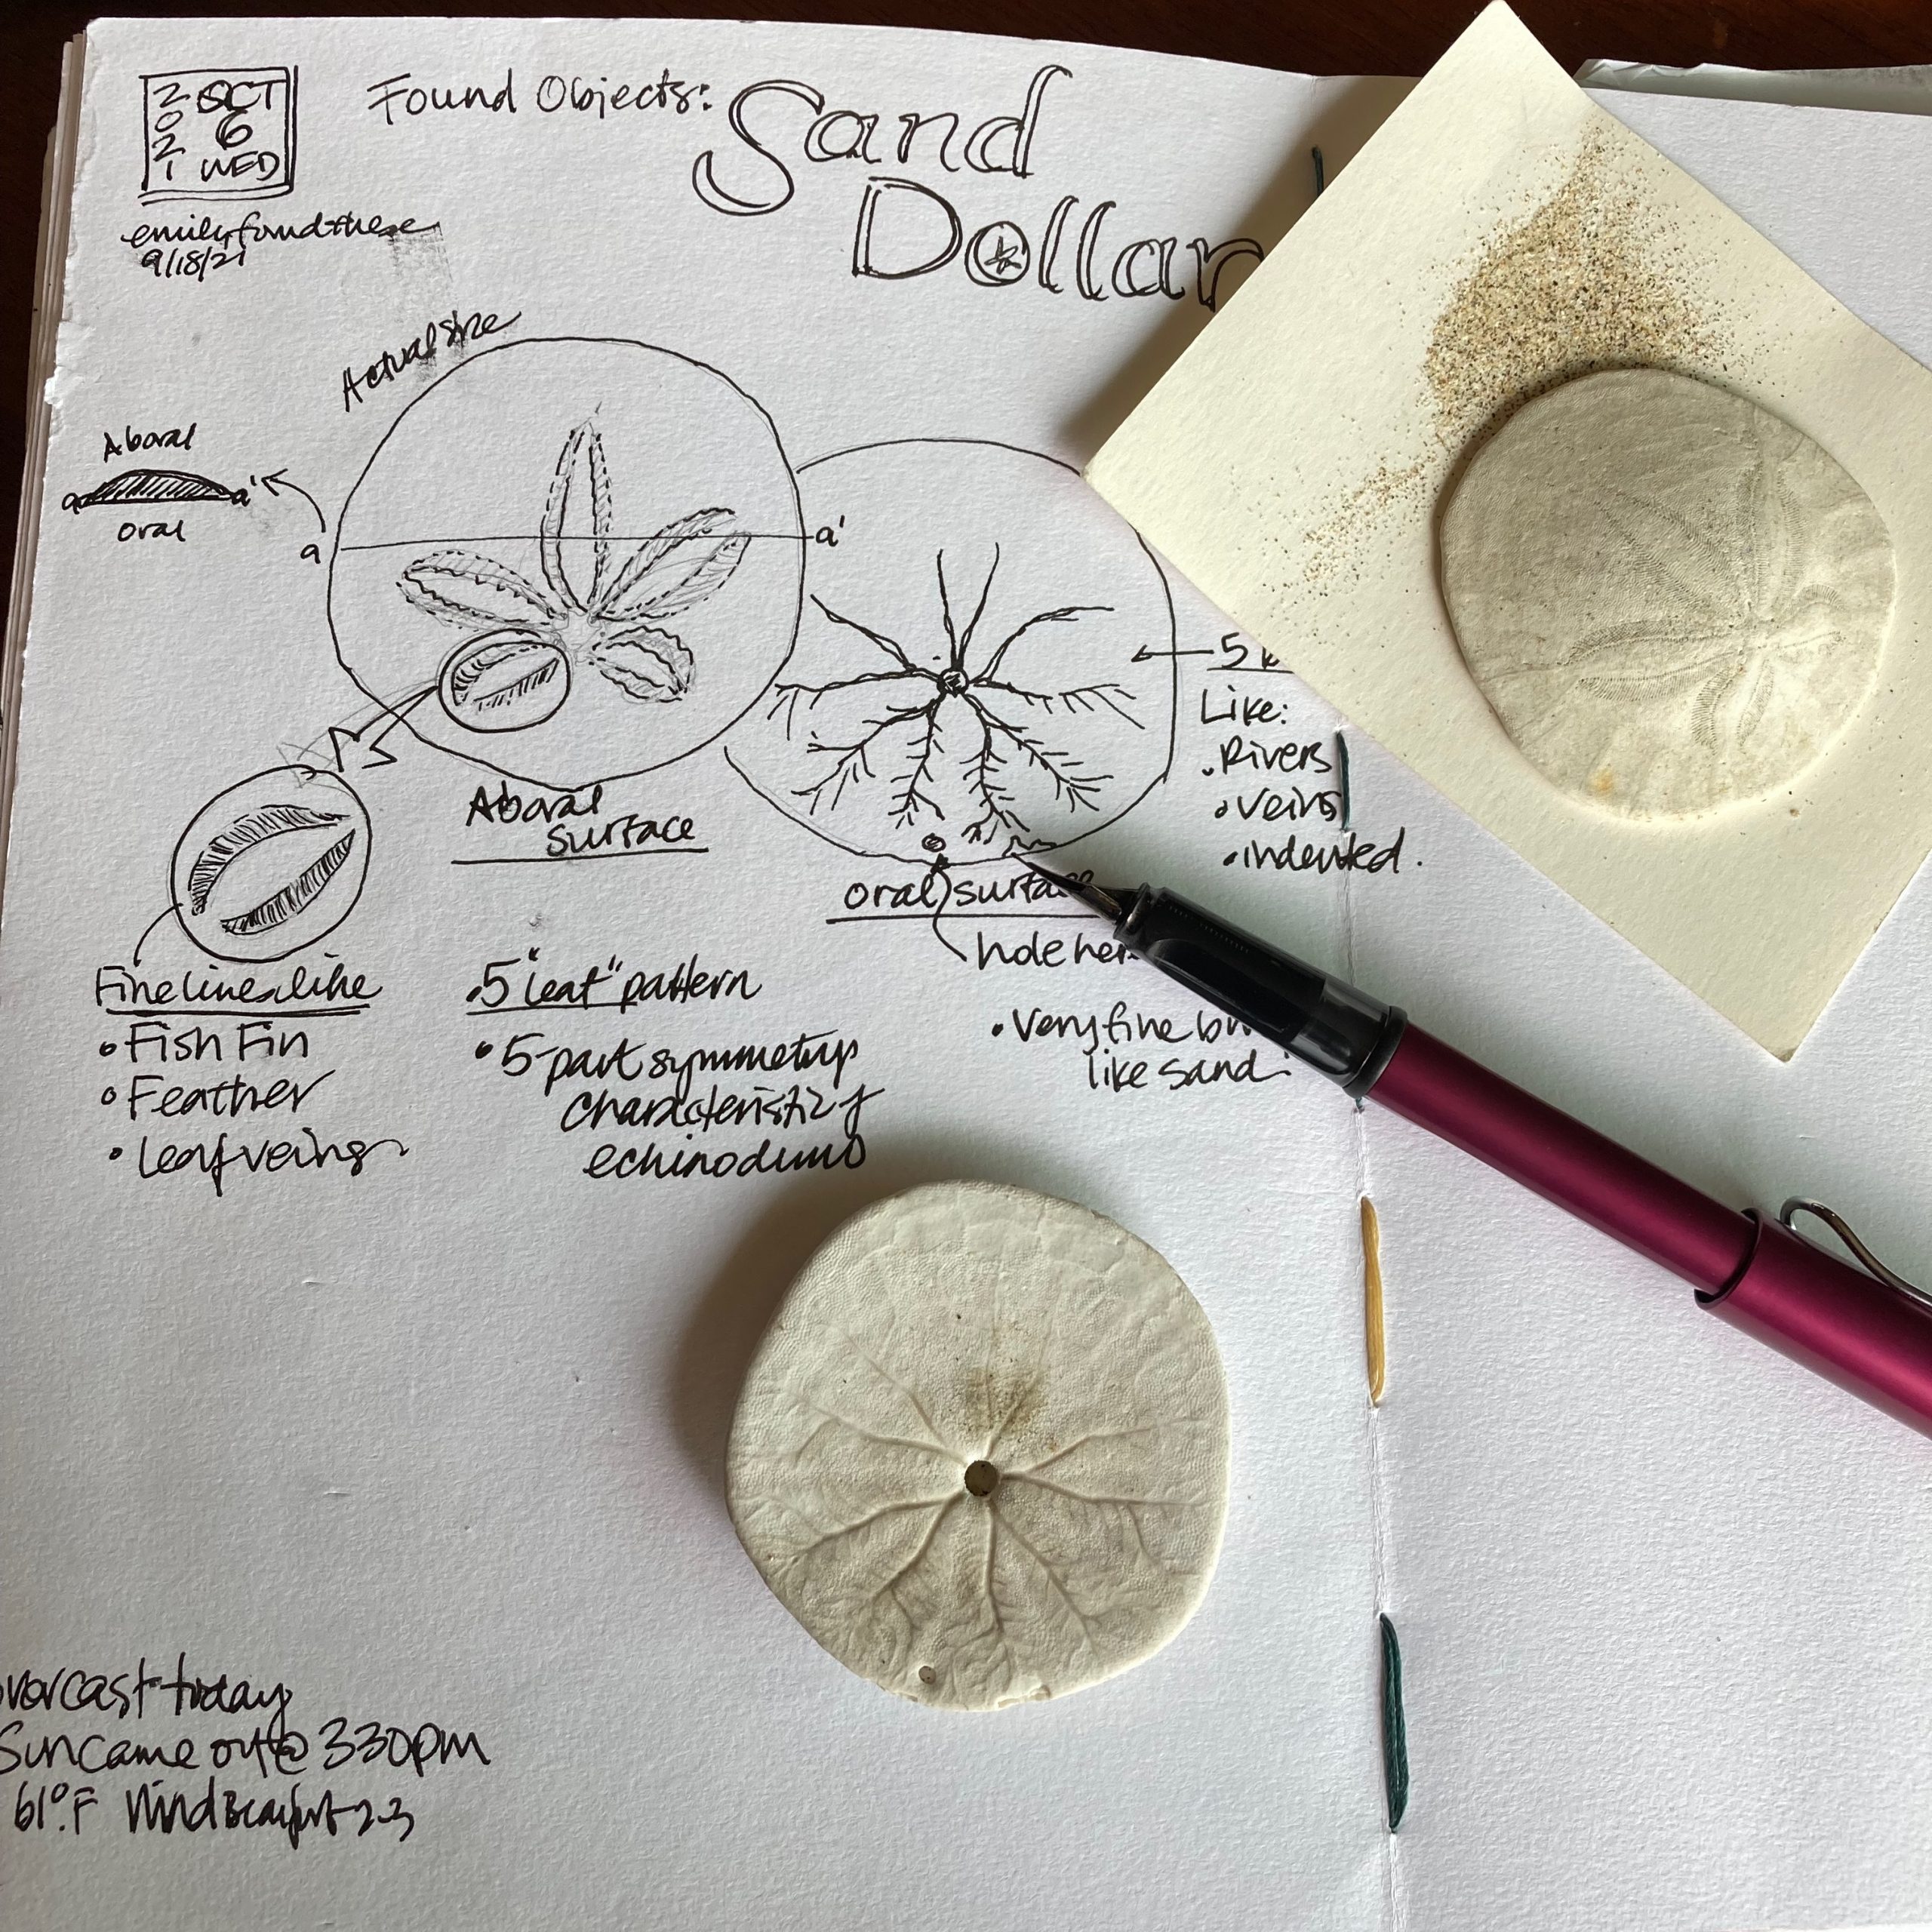 Found nature objects: Sand dollars - SPARK IN NATURE